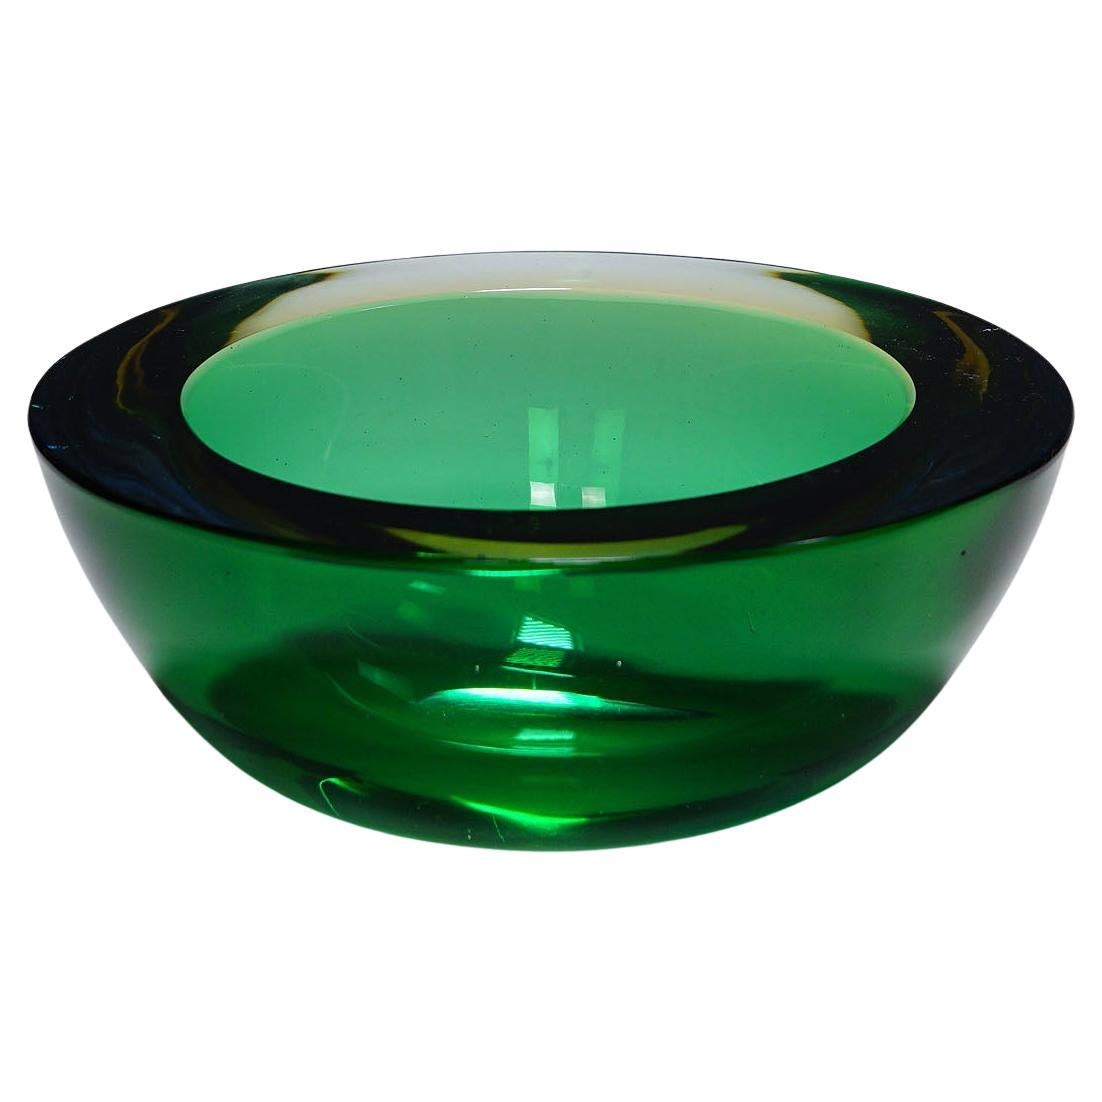 Archimede Seguso Geode Bowl in Green and Yellow, Murano Italy ca. 1960s